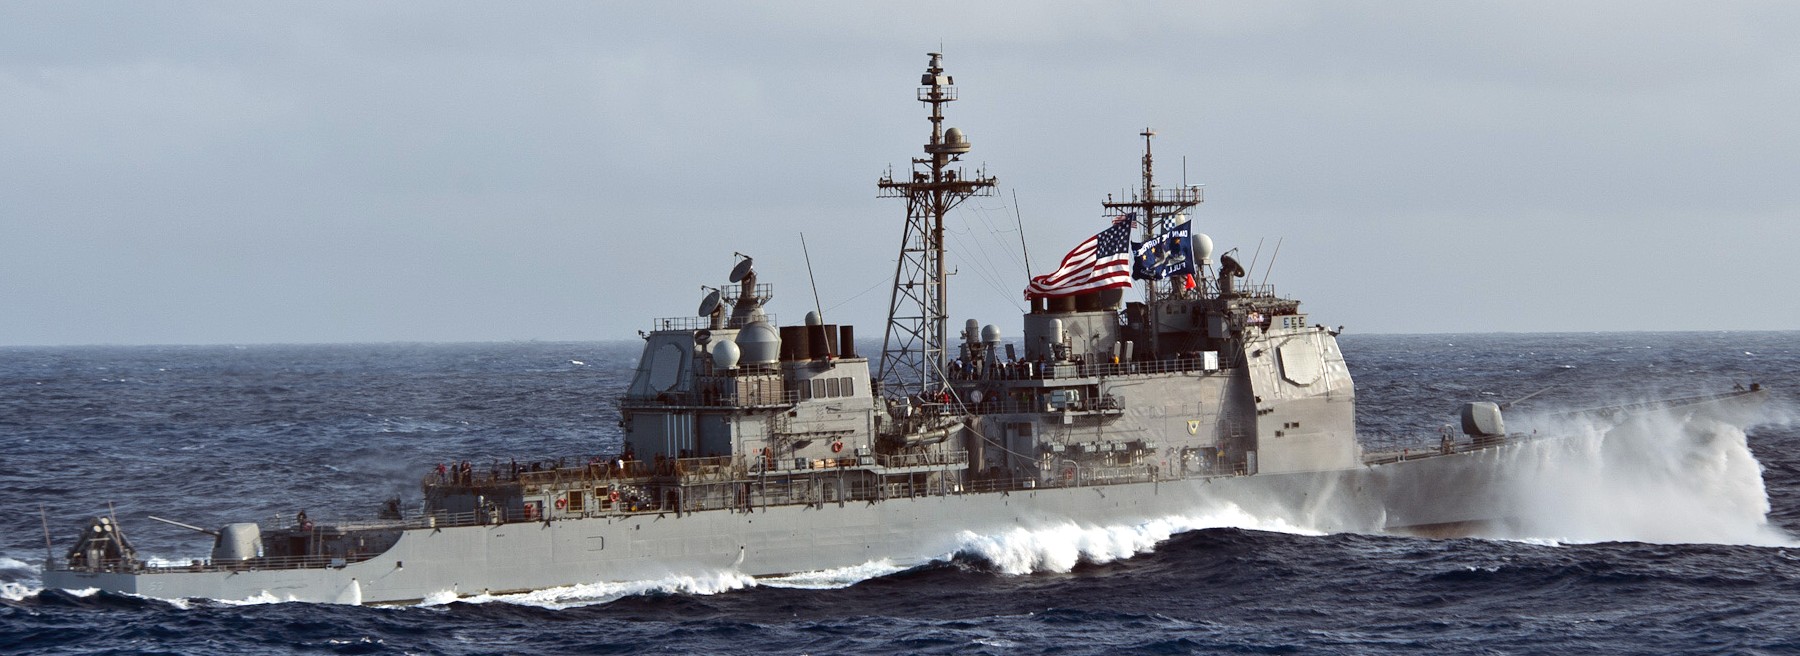 cg-53 uss mobile bay ticonderoga class guided missile cruiser aegis us navy 52